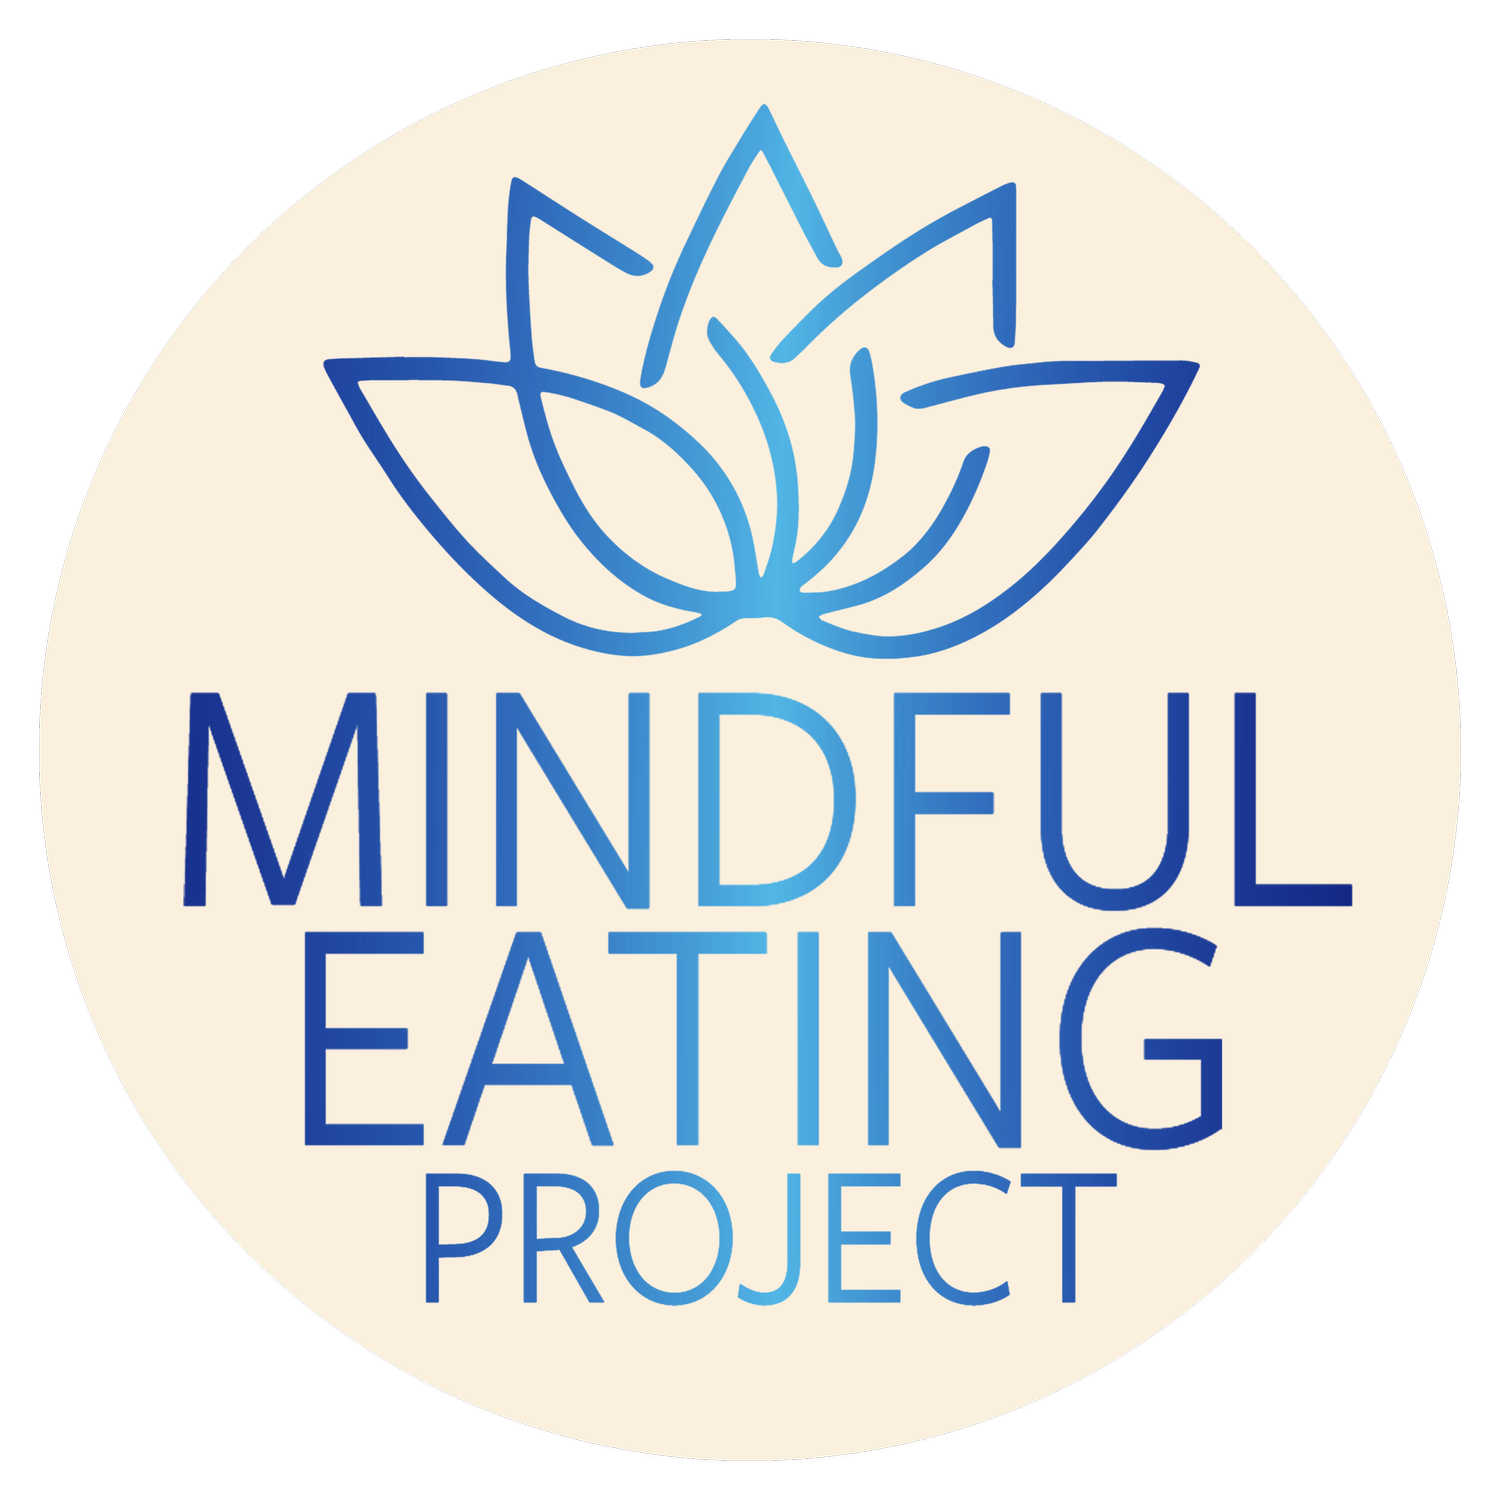 The Mindful Eating Project